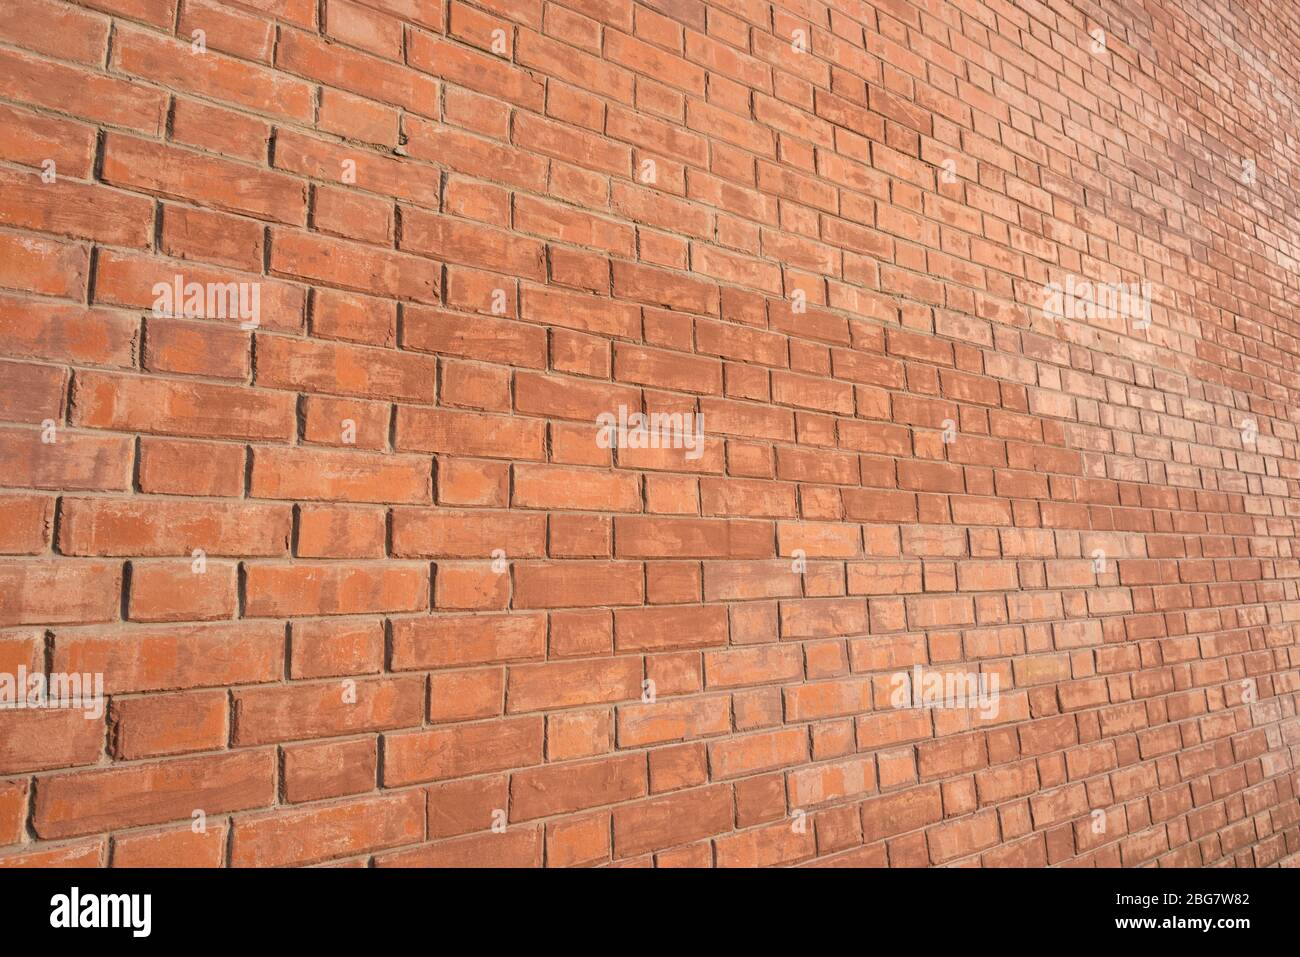 Brick wall, an angled view, lit with warm light. Stock Photo